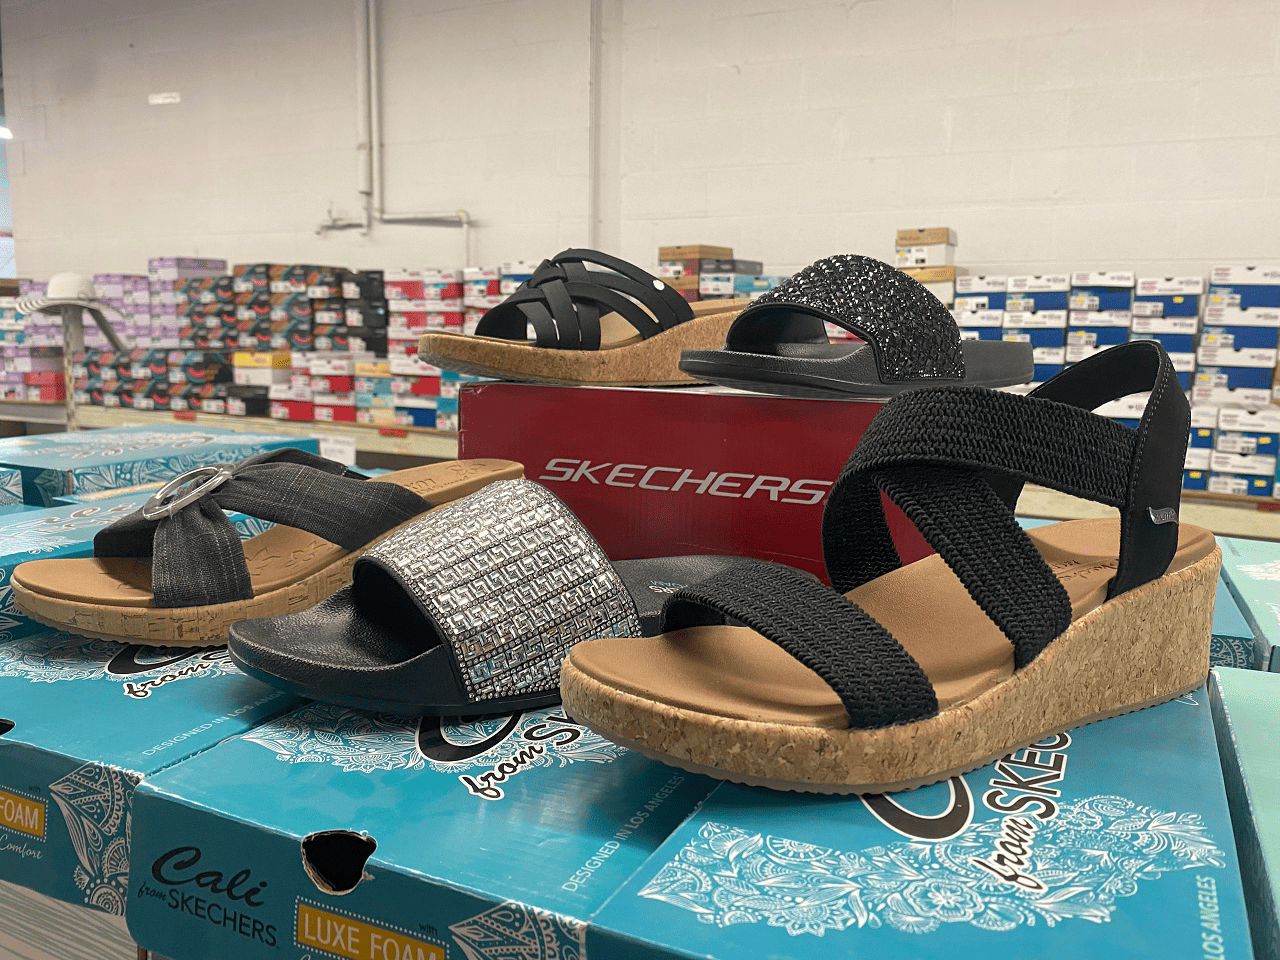 nedenunder Bageri Recite Huge warehouse sale in Mississauga offers big discounts on Skechers shoes  and sandals | insauga